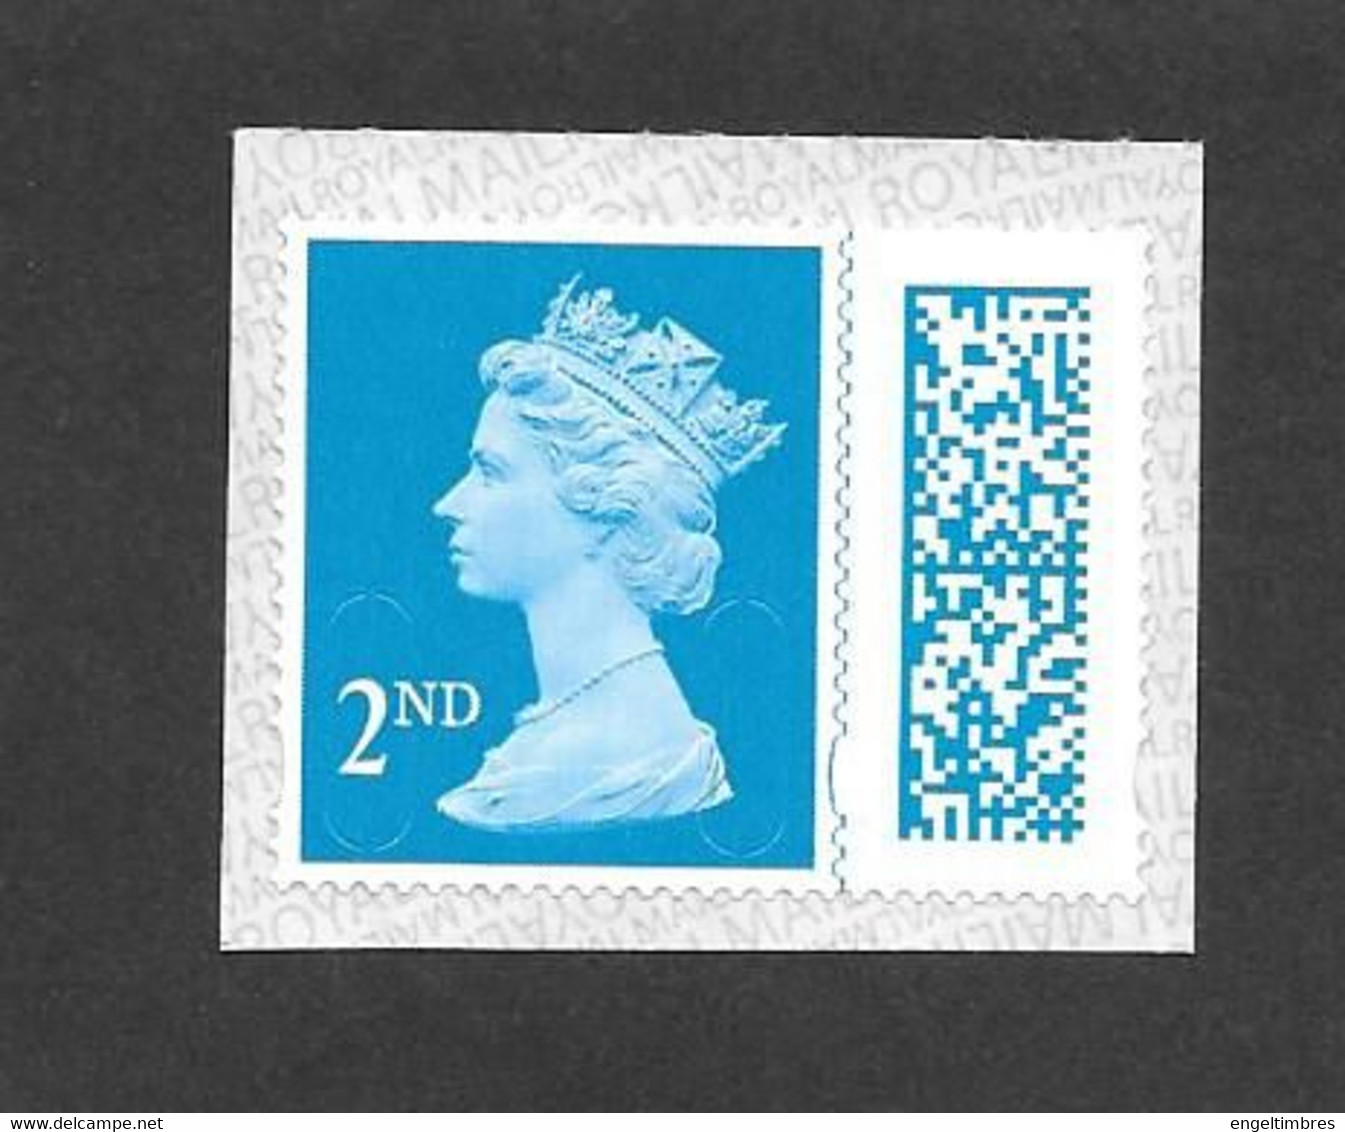 2012 - New Large 2nd Class Stamp With BARCODE - Machins